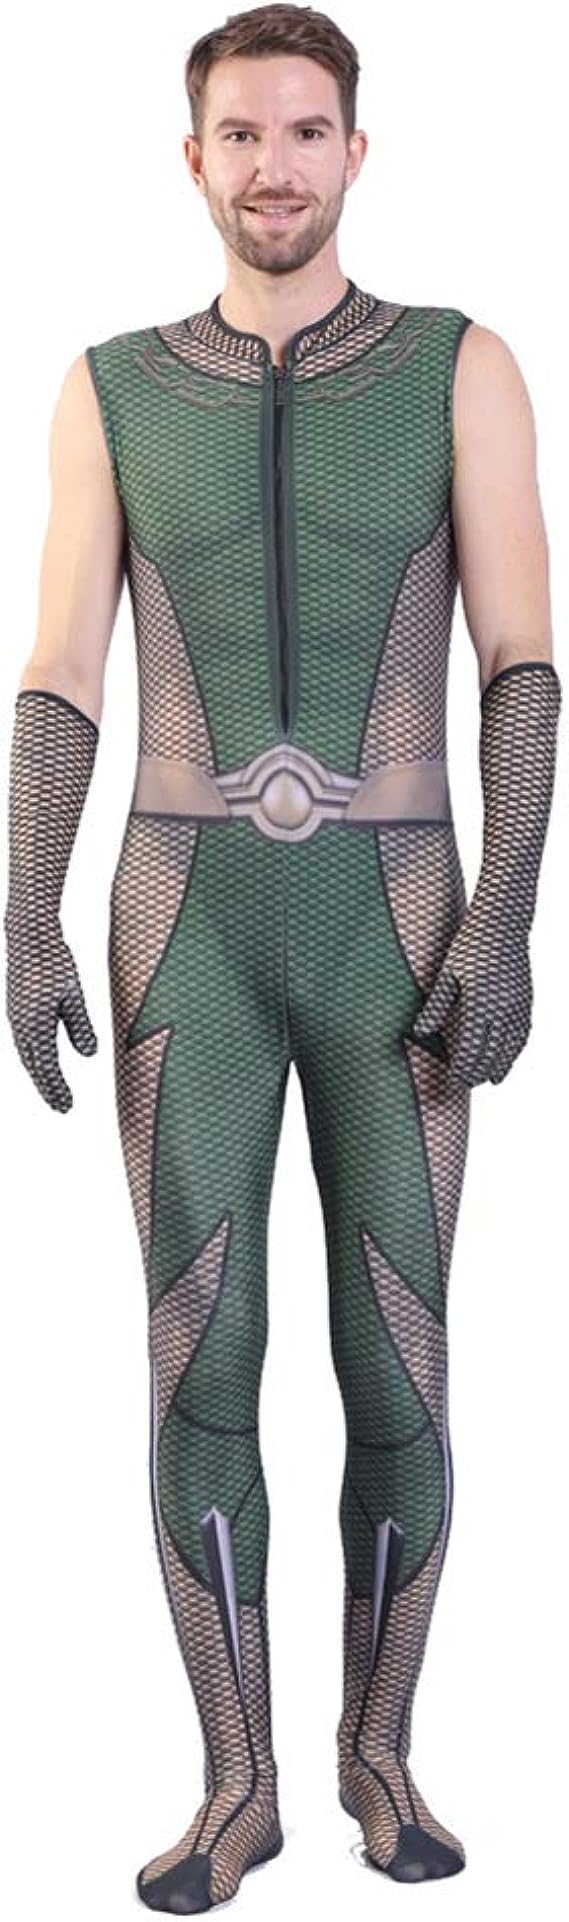 The Boys Adult Kids Cosplay Costume The Deep Cosplay Jumpsuit XX-Large